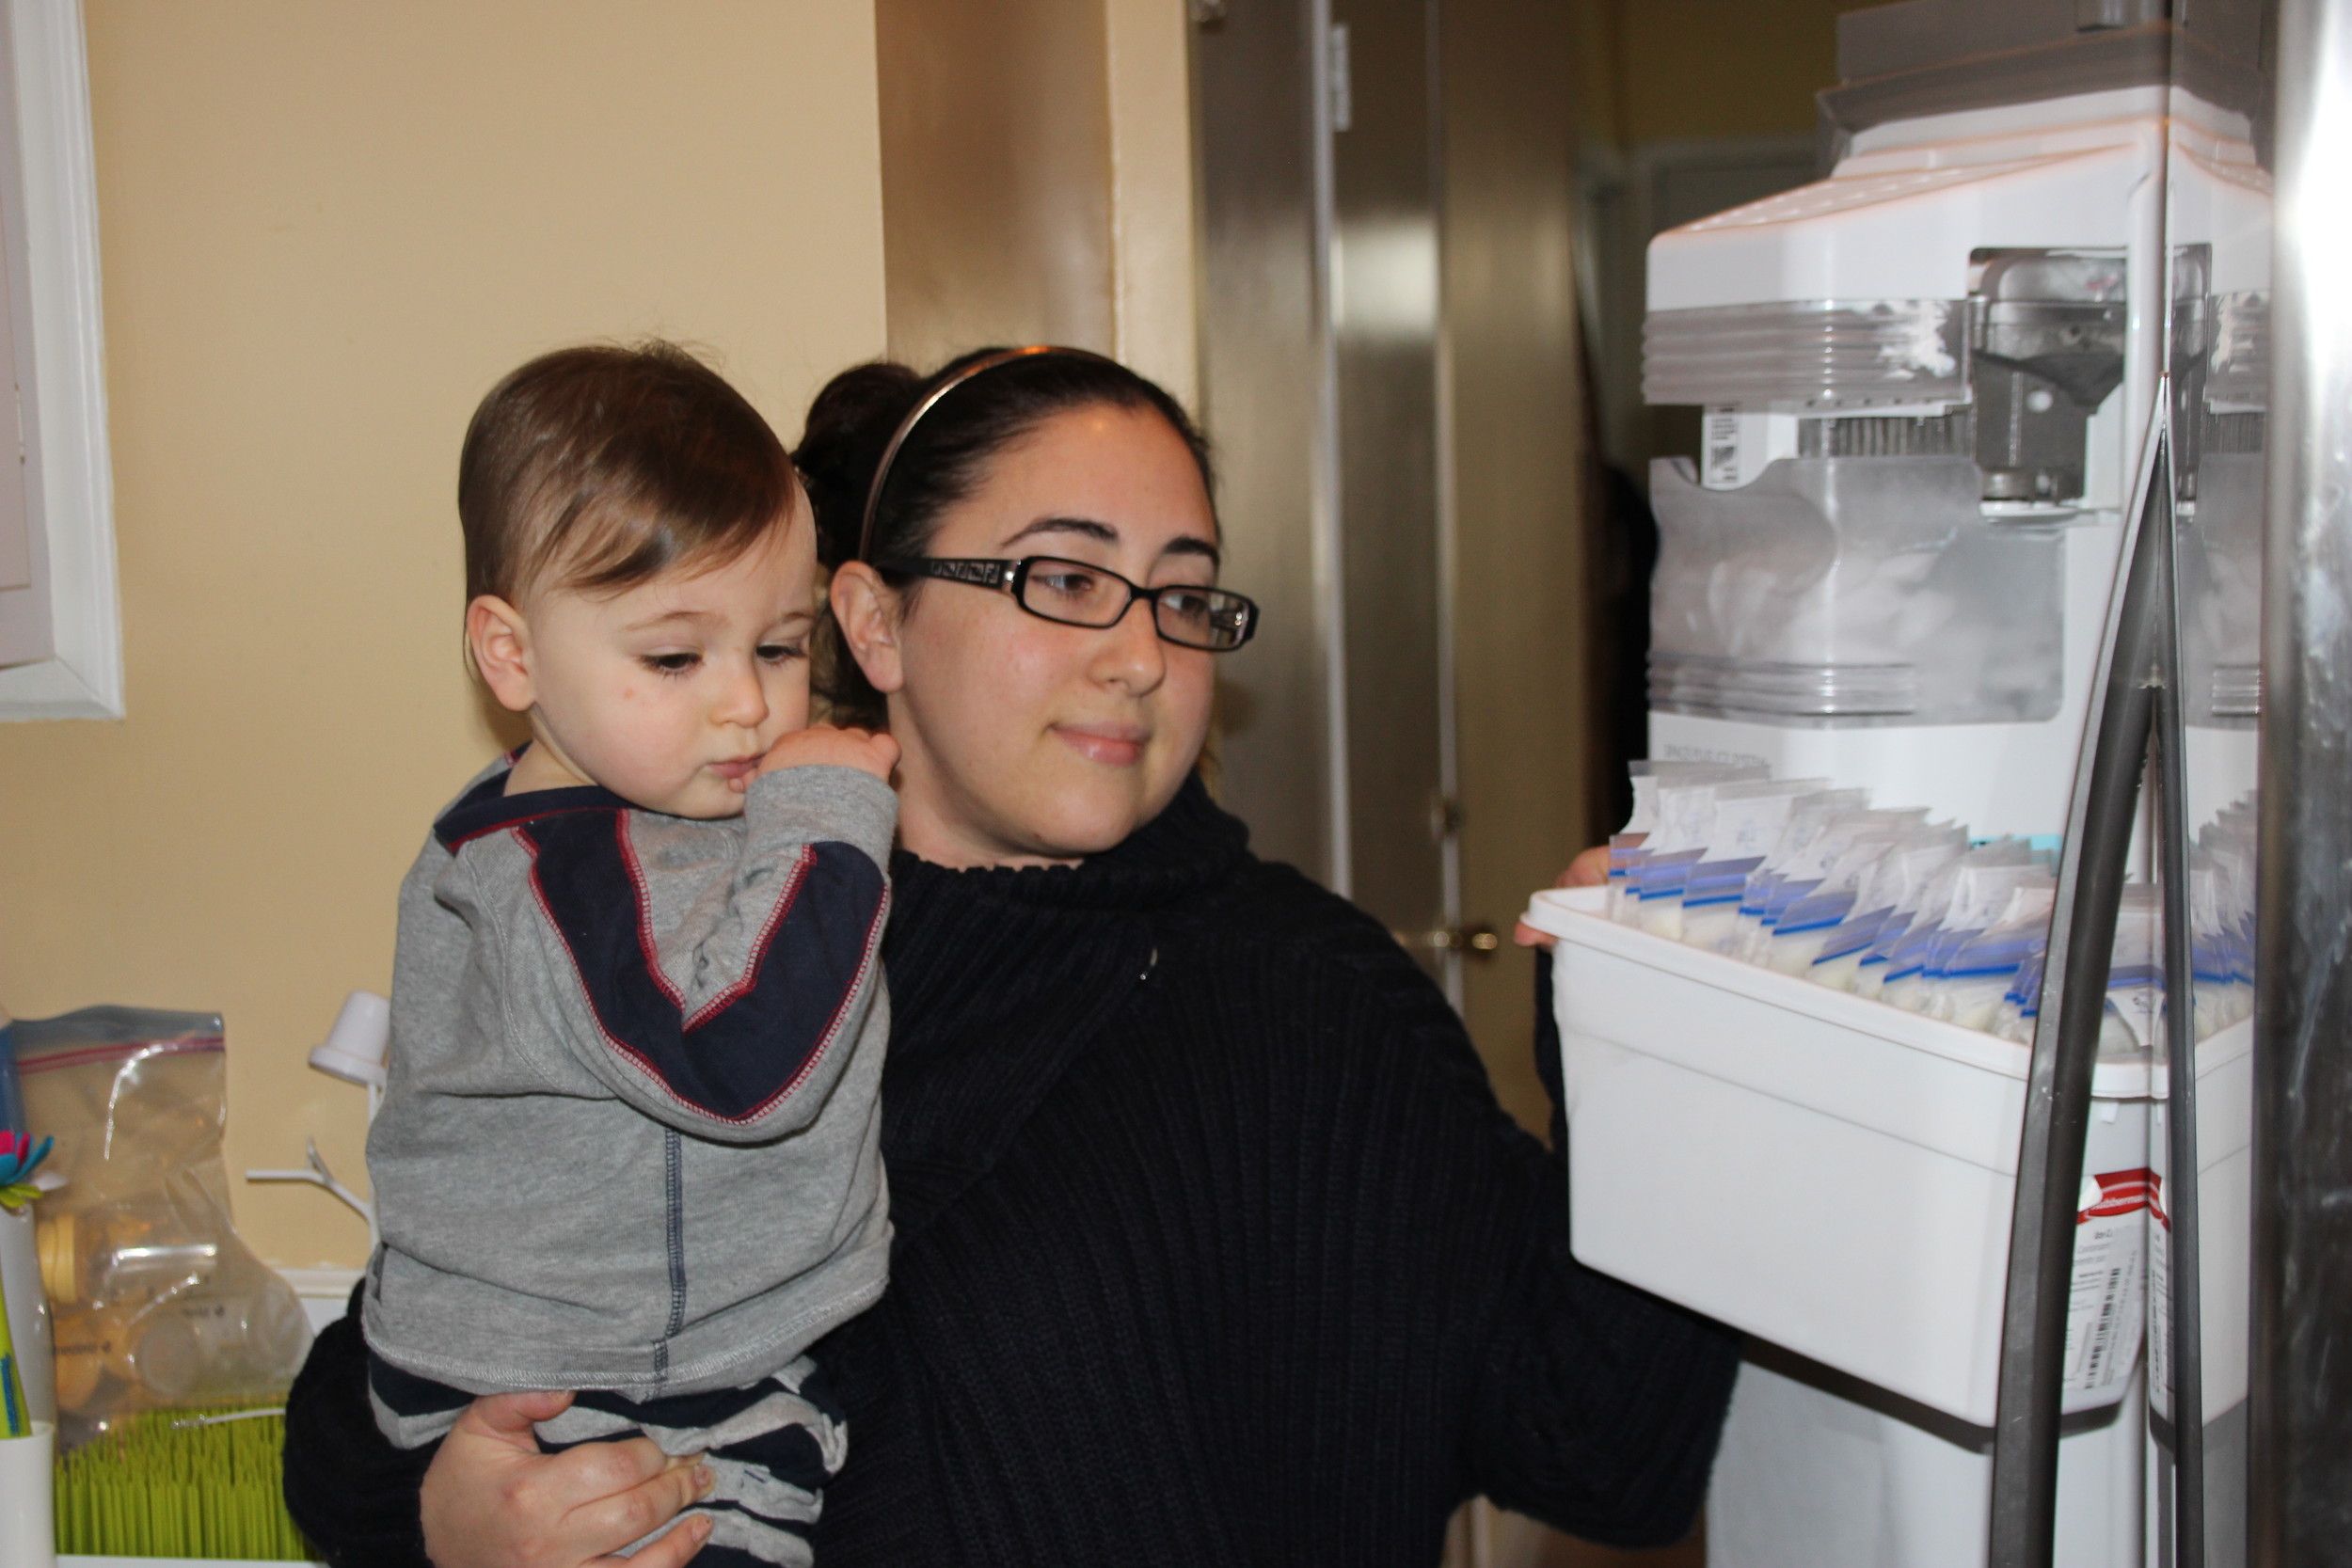 Rachael Fried rifled through her drawer of frozen milk, which she had hoped to donate to a family in need. The New York Milk Bank rejected her donation because she did not meet its minimum-volume requirement, which helps the bank control costs.